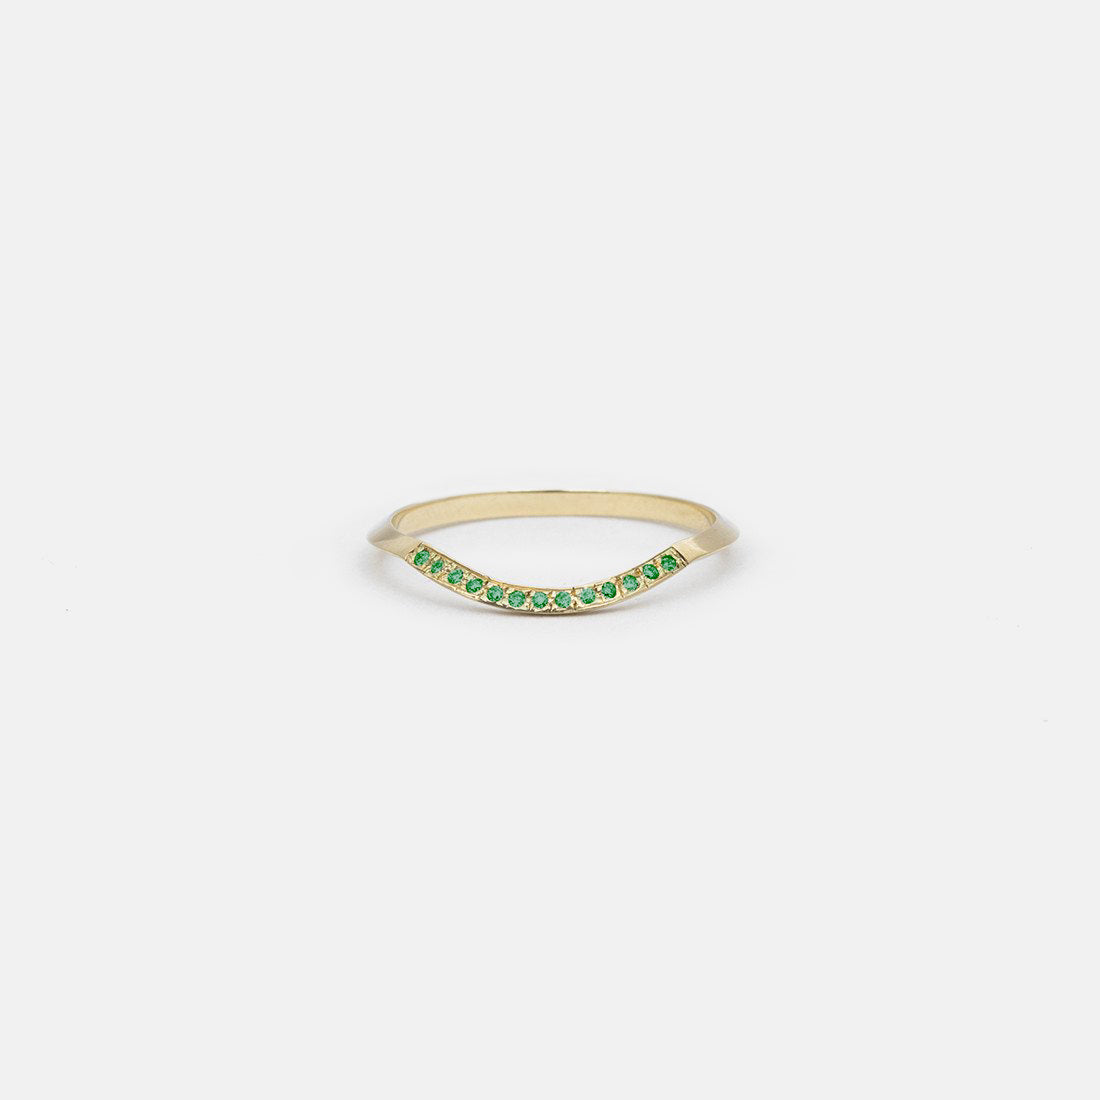 Arba Unique Ring in 14k Gold set with Emeralds By SHW Fine Jewelry NYC